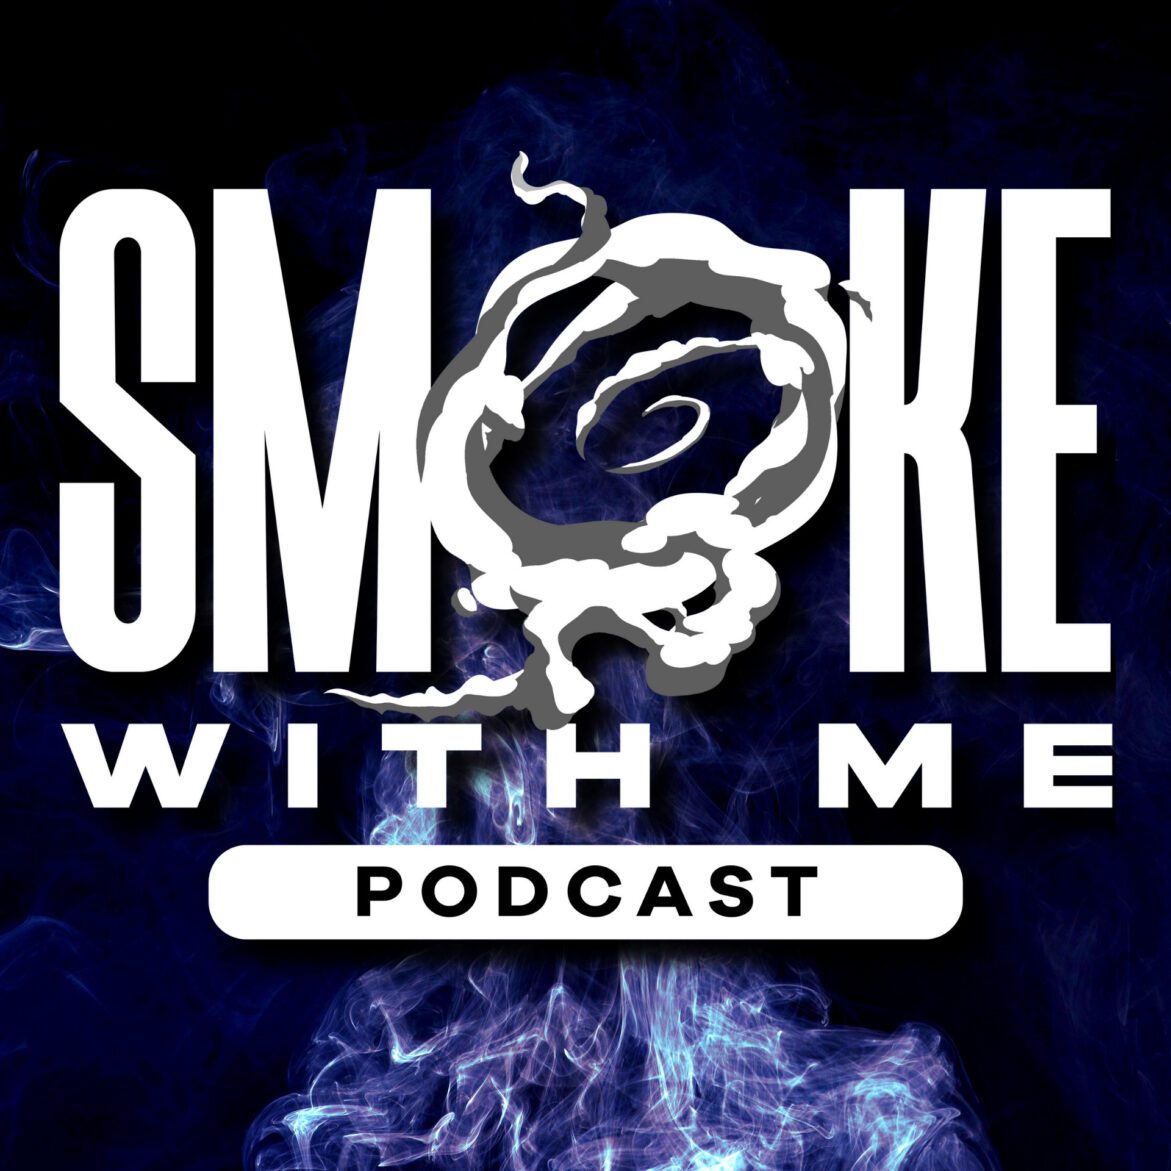 Black Podcasting - Seeing Spaceships feat. Fabo | Smoke With Me Podcast (Episode 6)